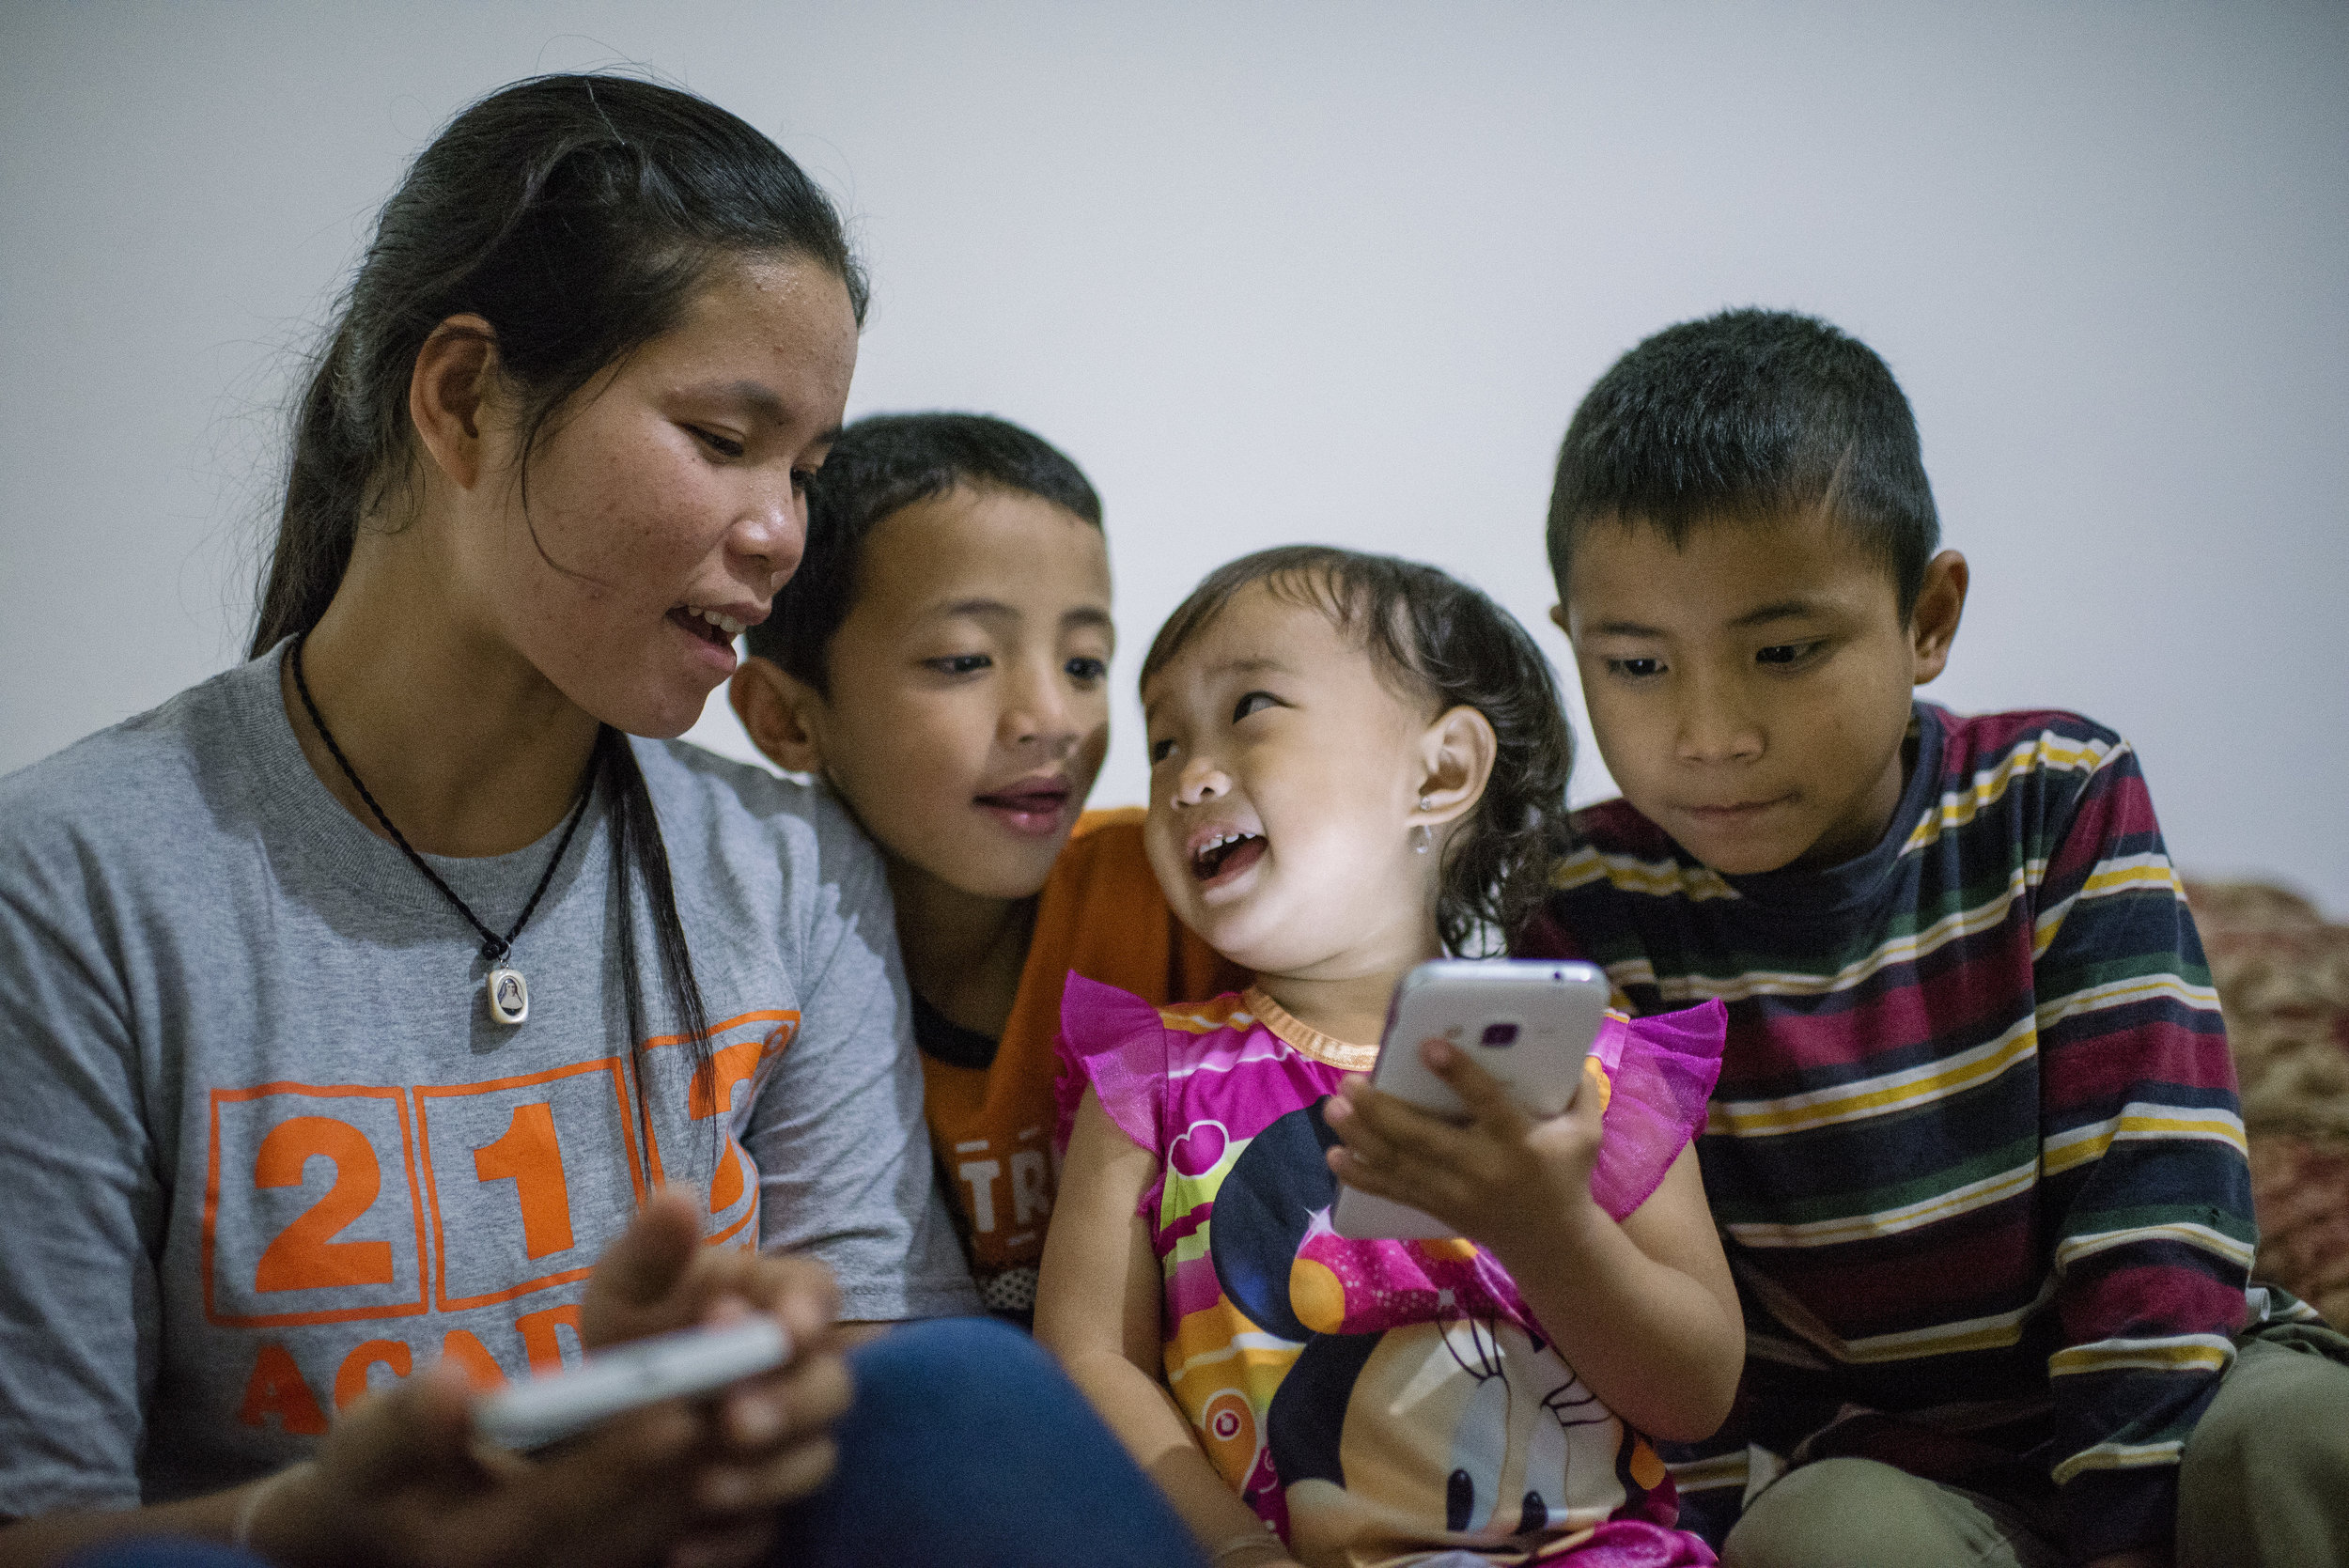  Phones play an important part in the kid's lives. It's a way to connect with their past culture, and also learn about their new culture. From left, Pray Moe, 24, Ti Reh, 8, Nga Meh, 2, and Reh Reh, 9, listen to one of their favorite songs, "I'm A Gu